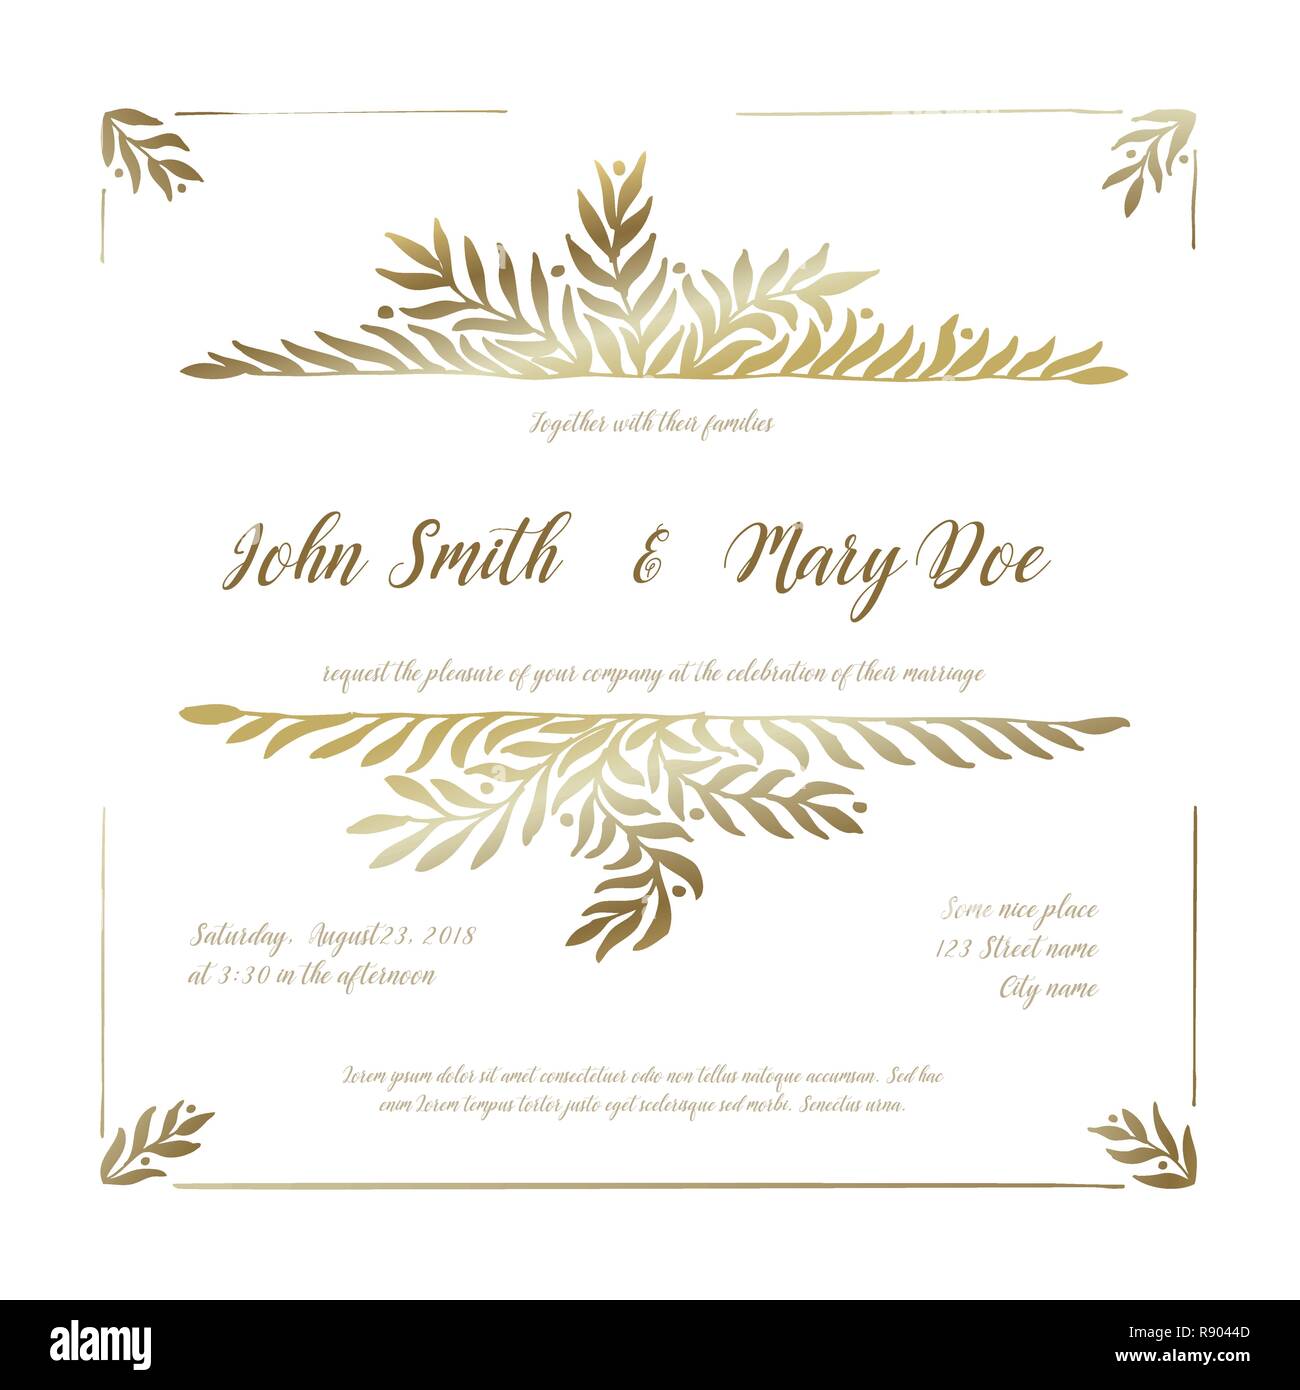 vector wedding invitation card template with golden floral